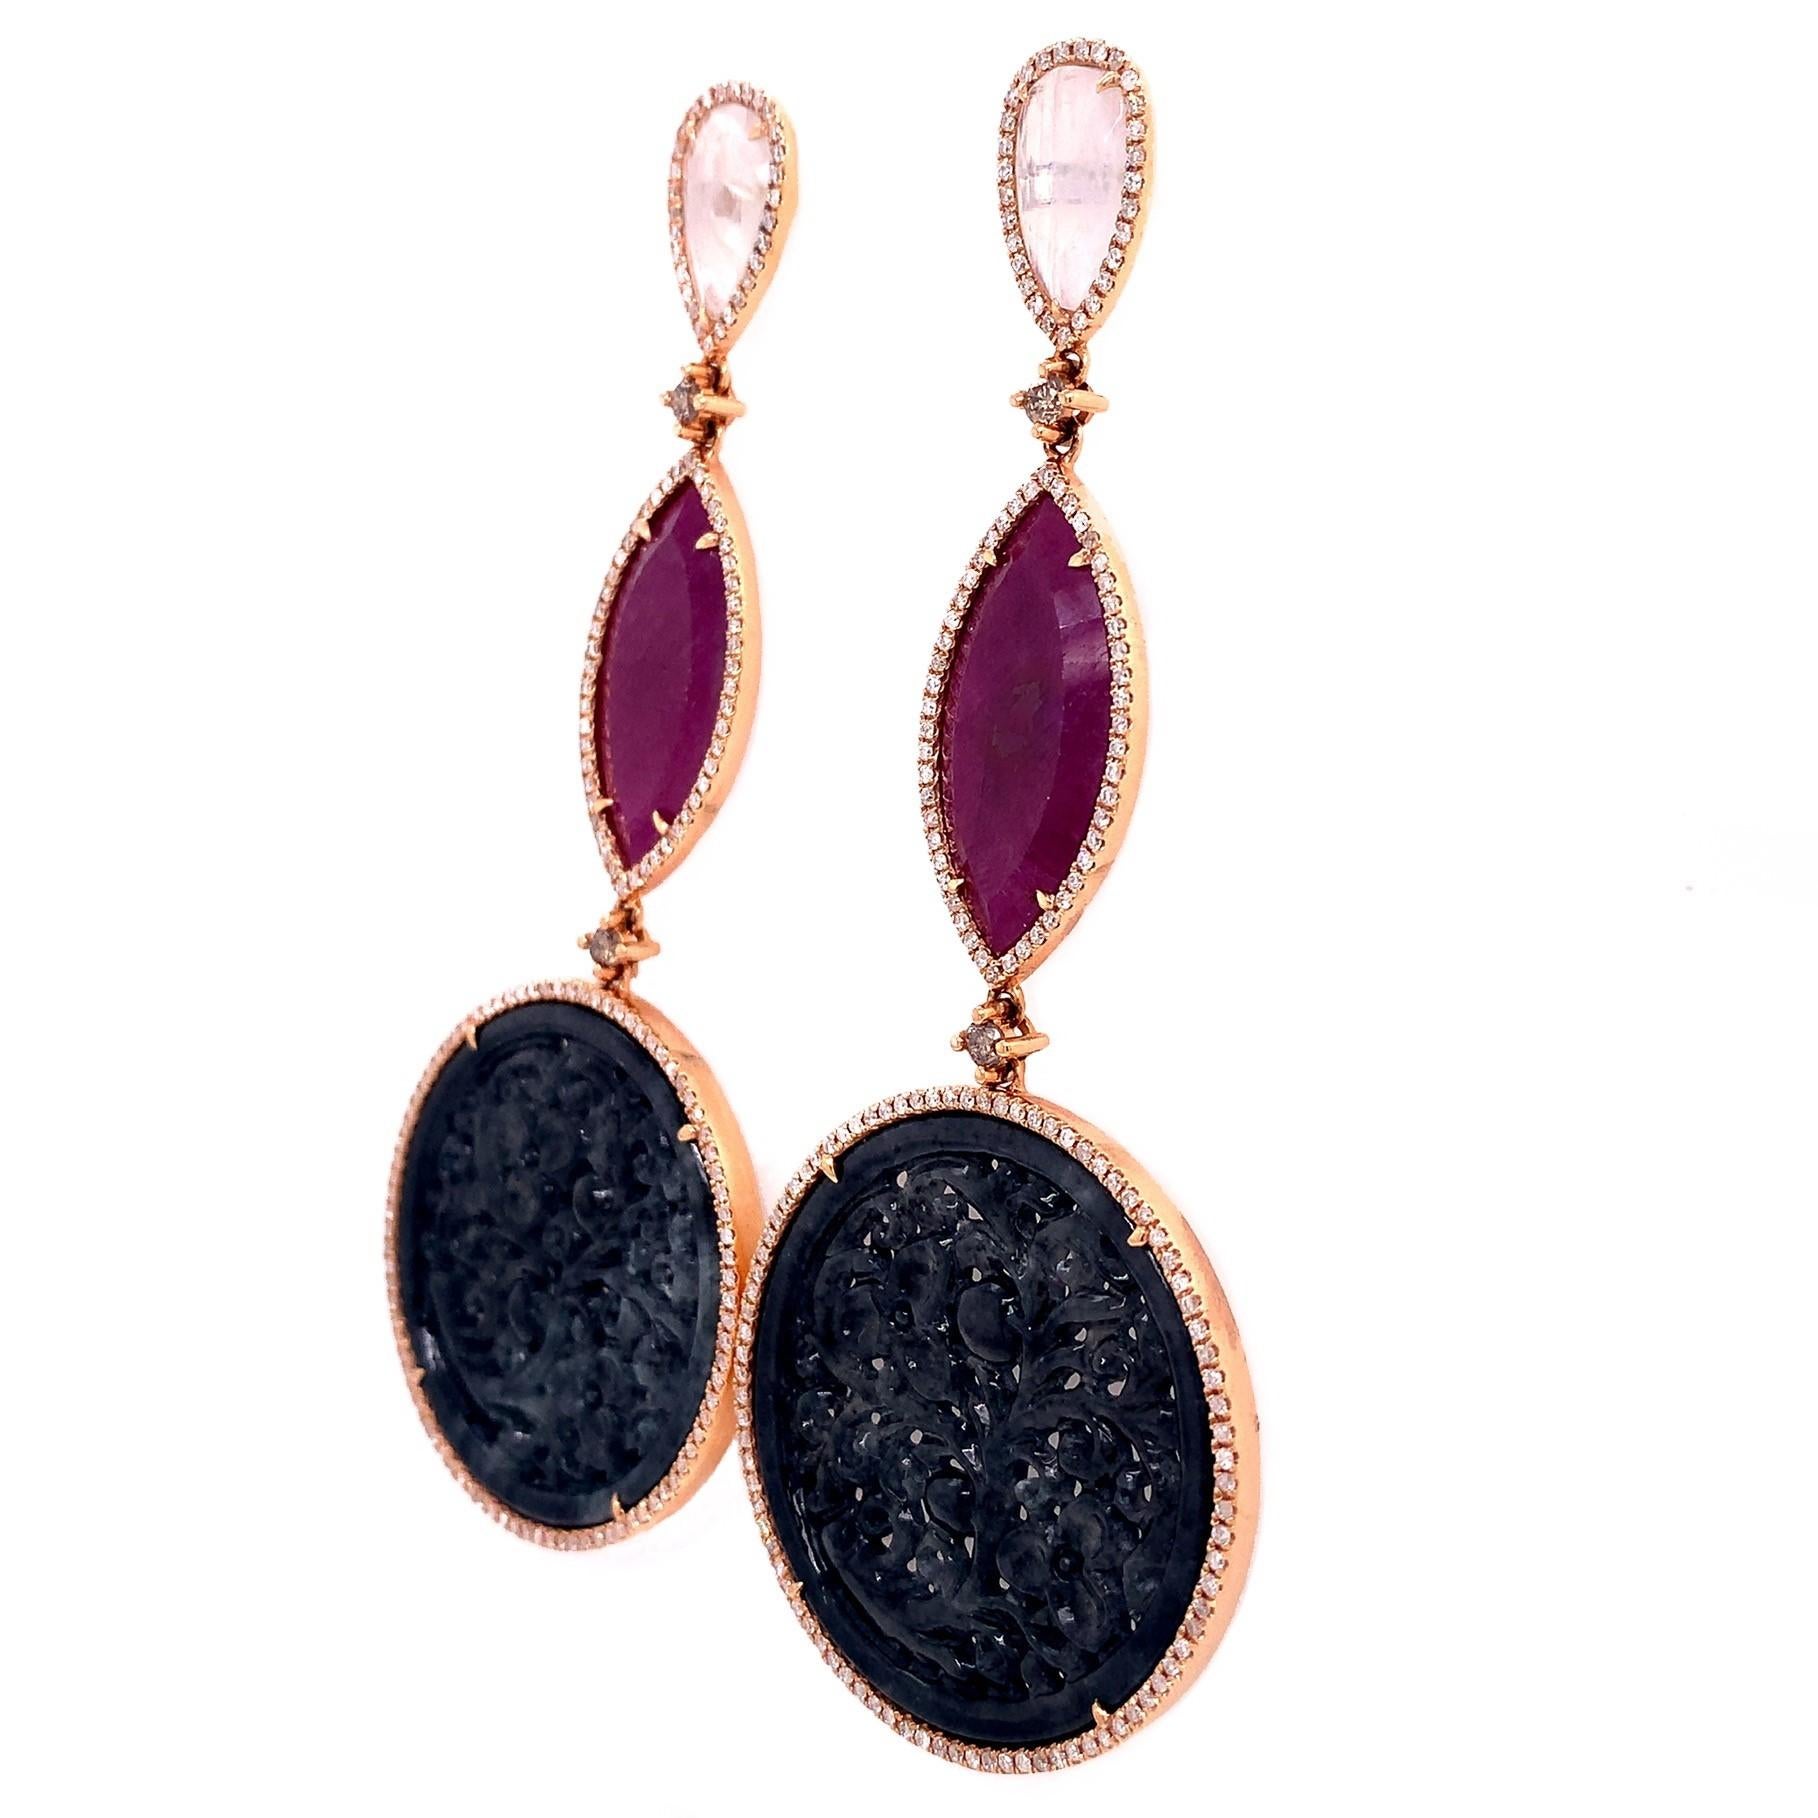 Lillipad collection,

Intricately hand carved charcoal colored Jade earring with diamonds, rubies and  moonstone on top set in 18k rose gold.

Moonstone: 3.20 ct total weight.
Ruby: 8.87 ct total weight
Jade: 40.00 ct total weight.
Diamond: 1.49 ct